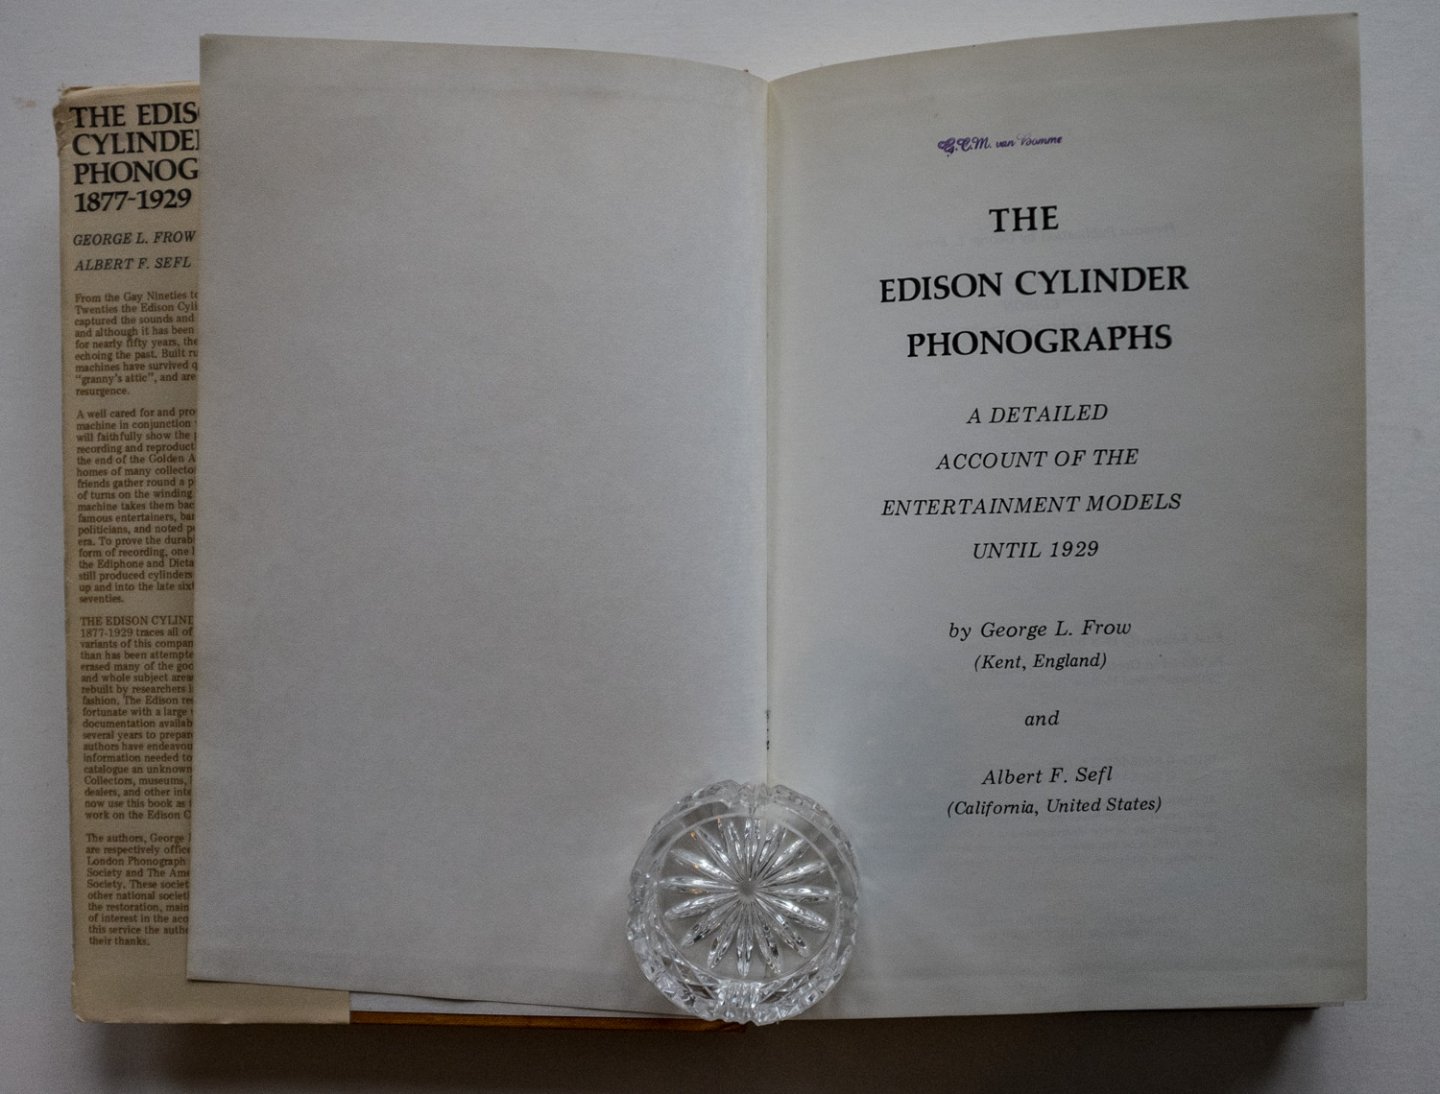 Frow. George L. and Albert F. Sefl - The Edison cylinder phonographs 1877-1929 - a detailed account of the entertainment models until 1929